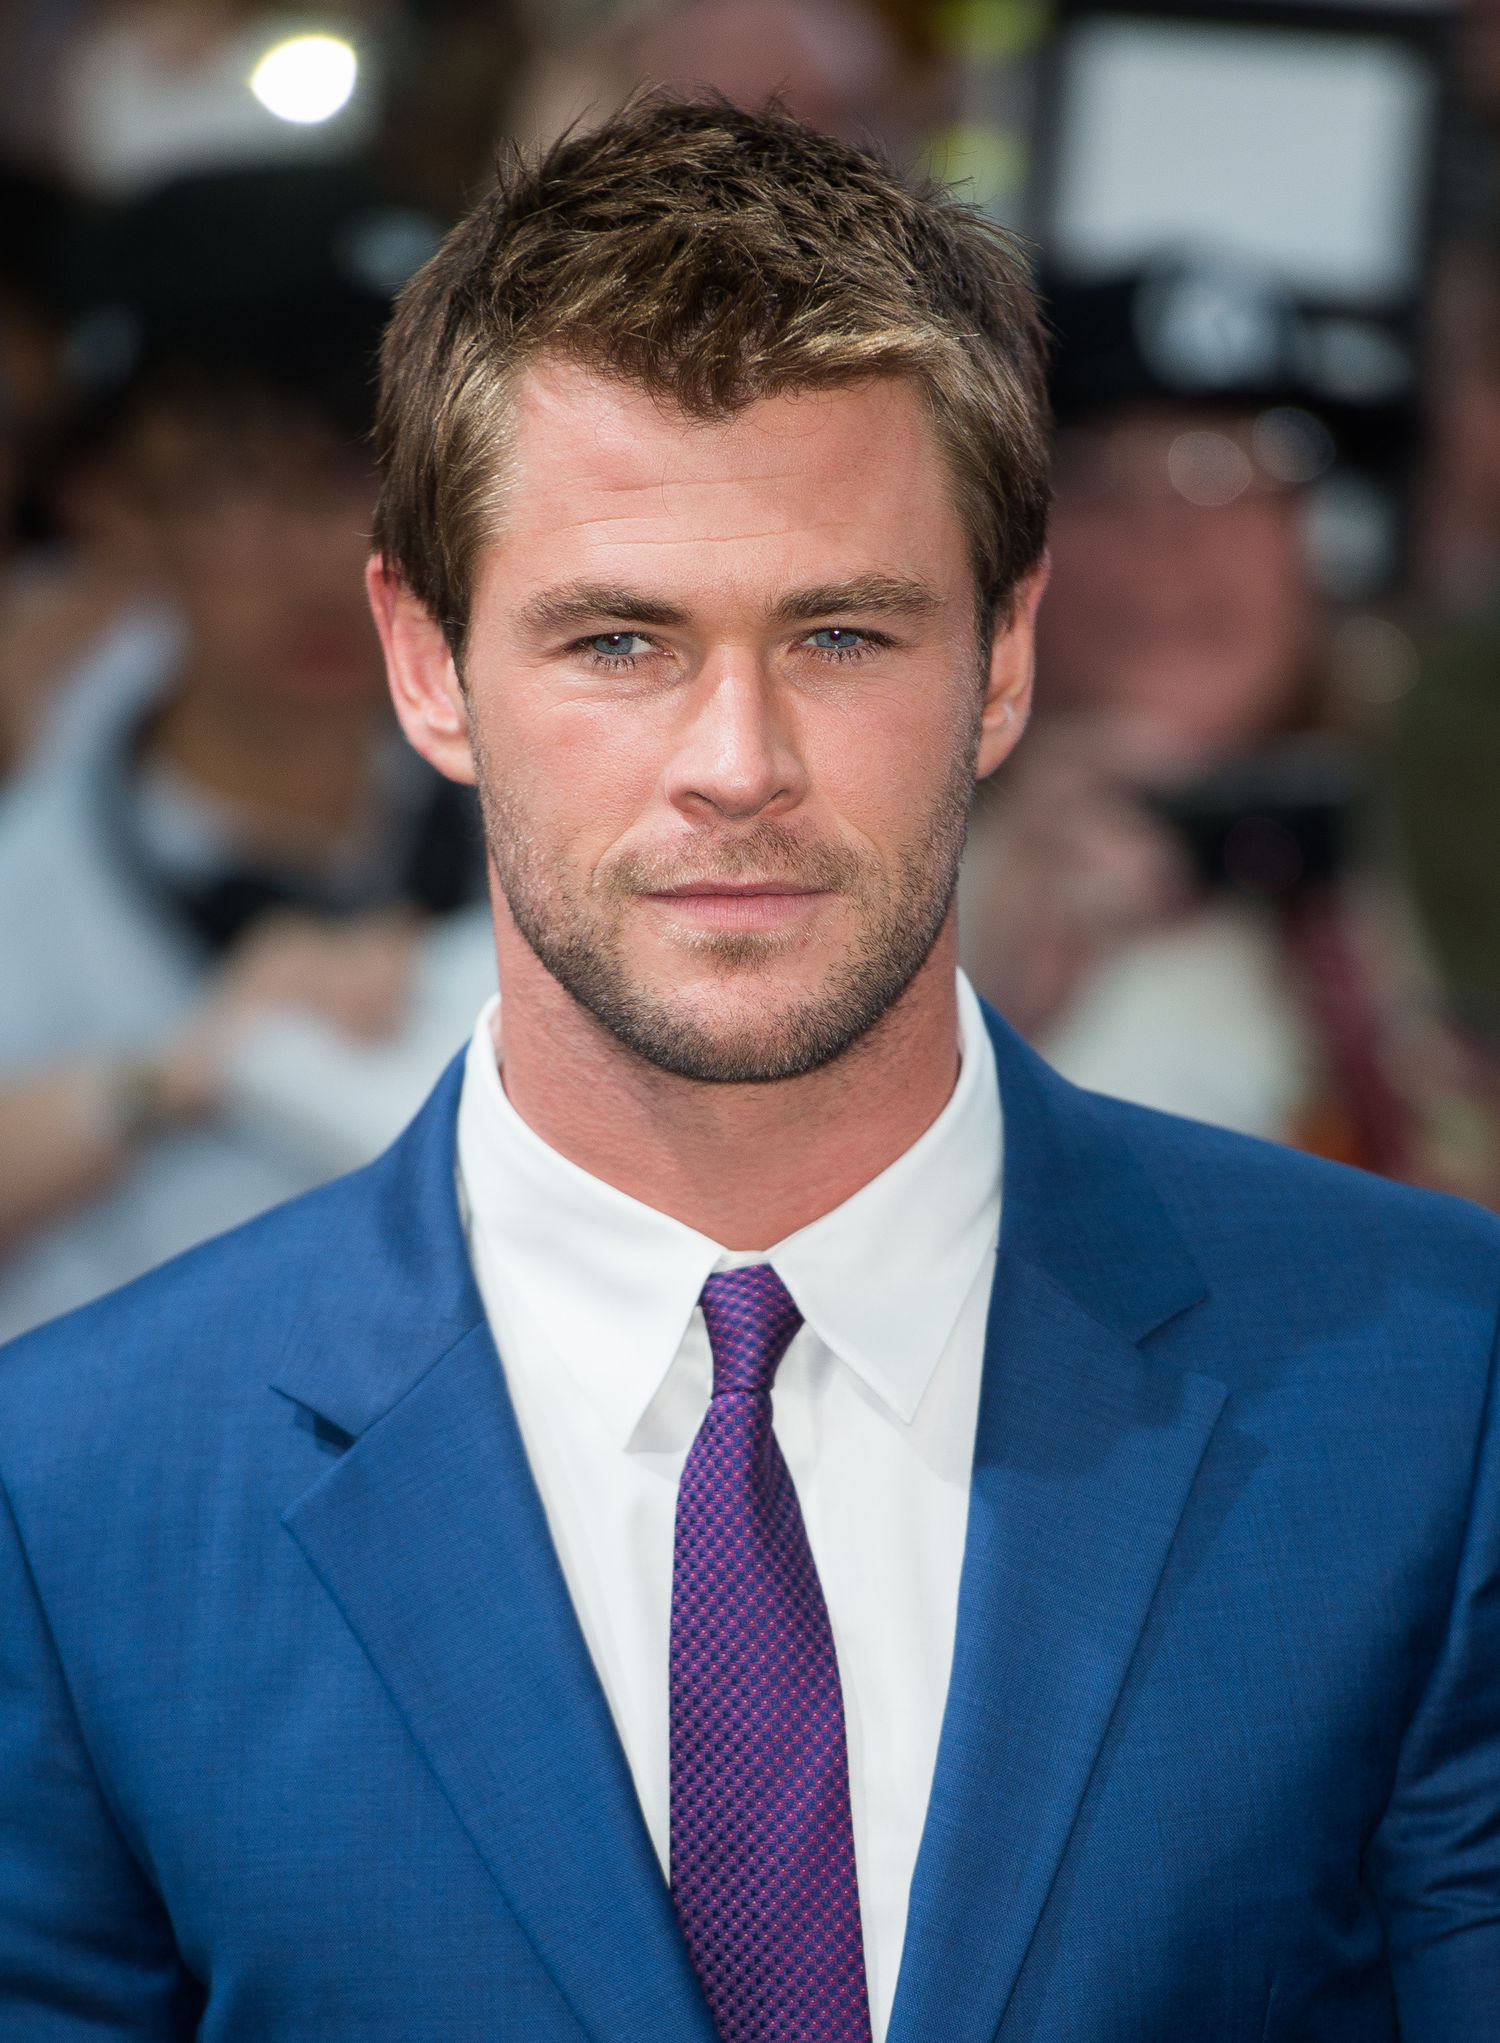 Chris Hemsworth: Celebrity, Played Sam in the 2010's Ca$h alongside English actor Sean Bean. 1500x2050 HD Background.